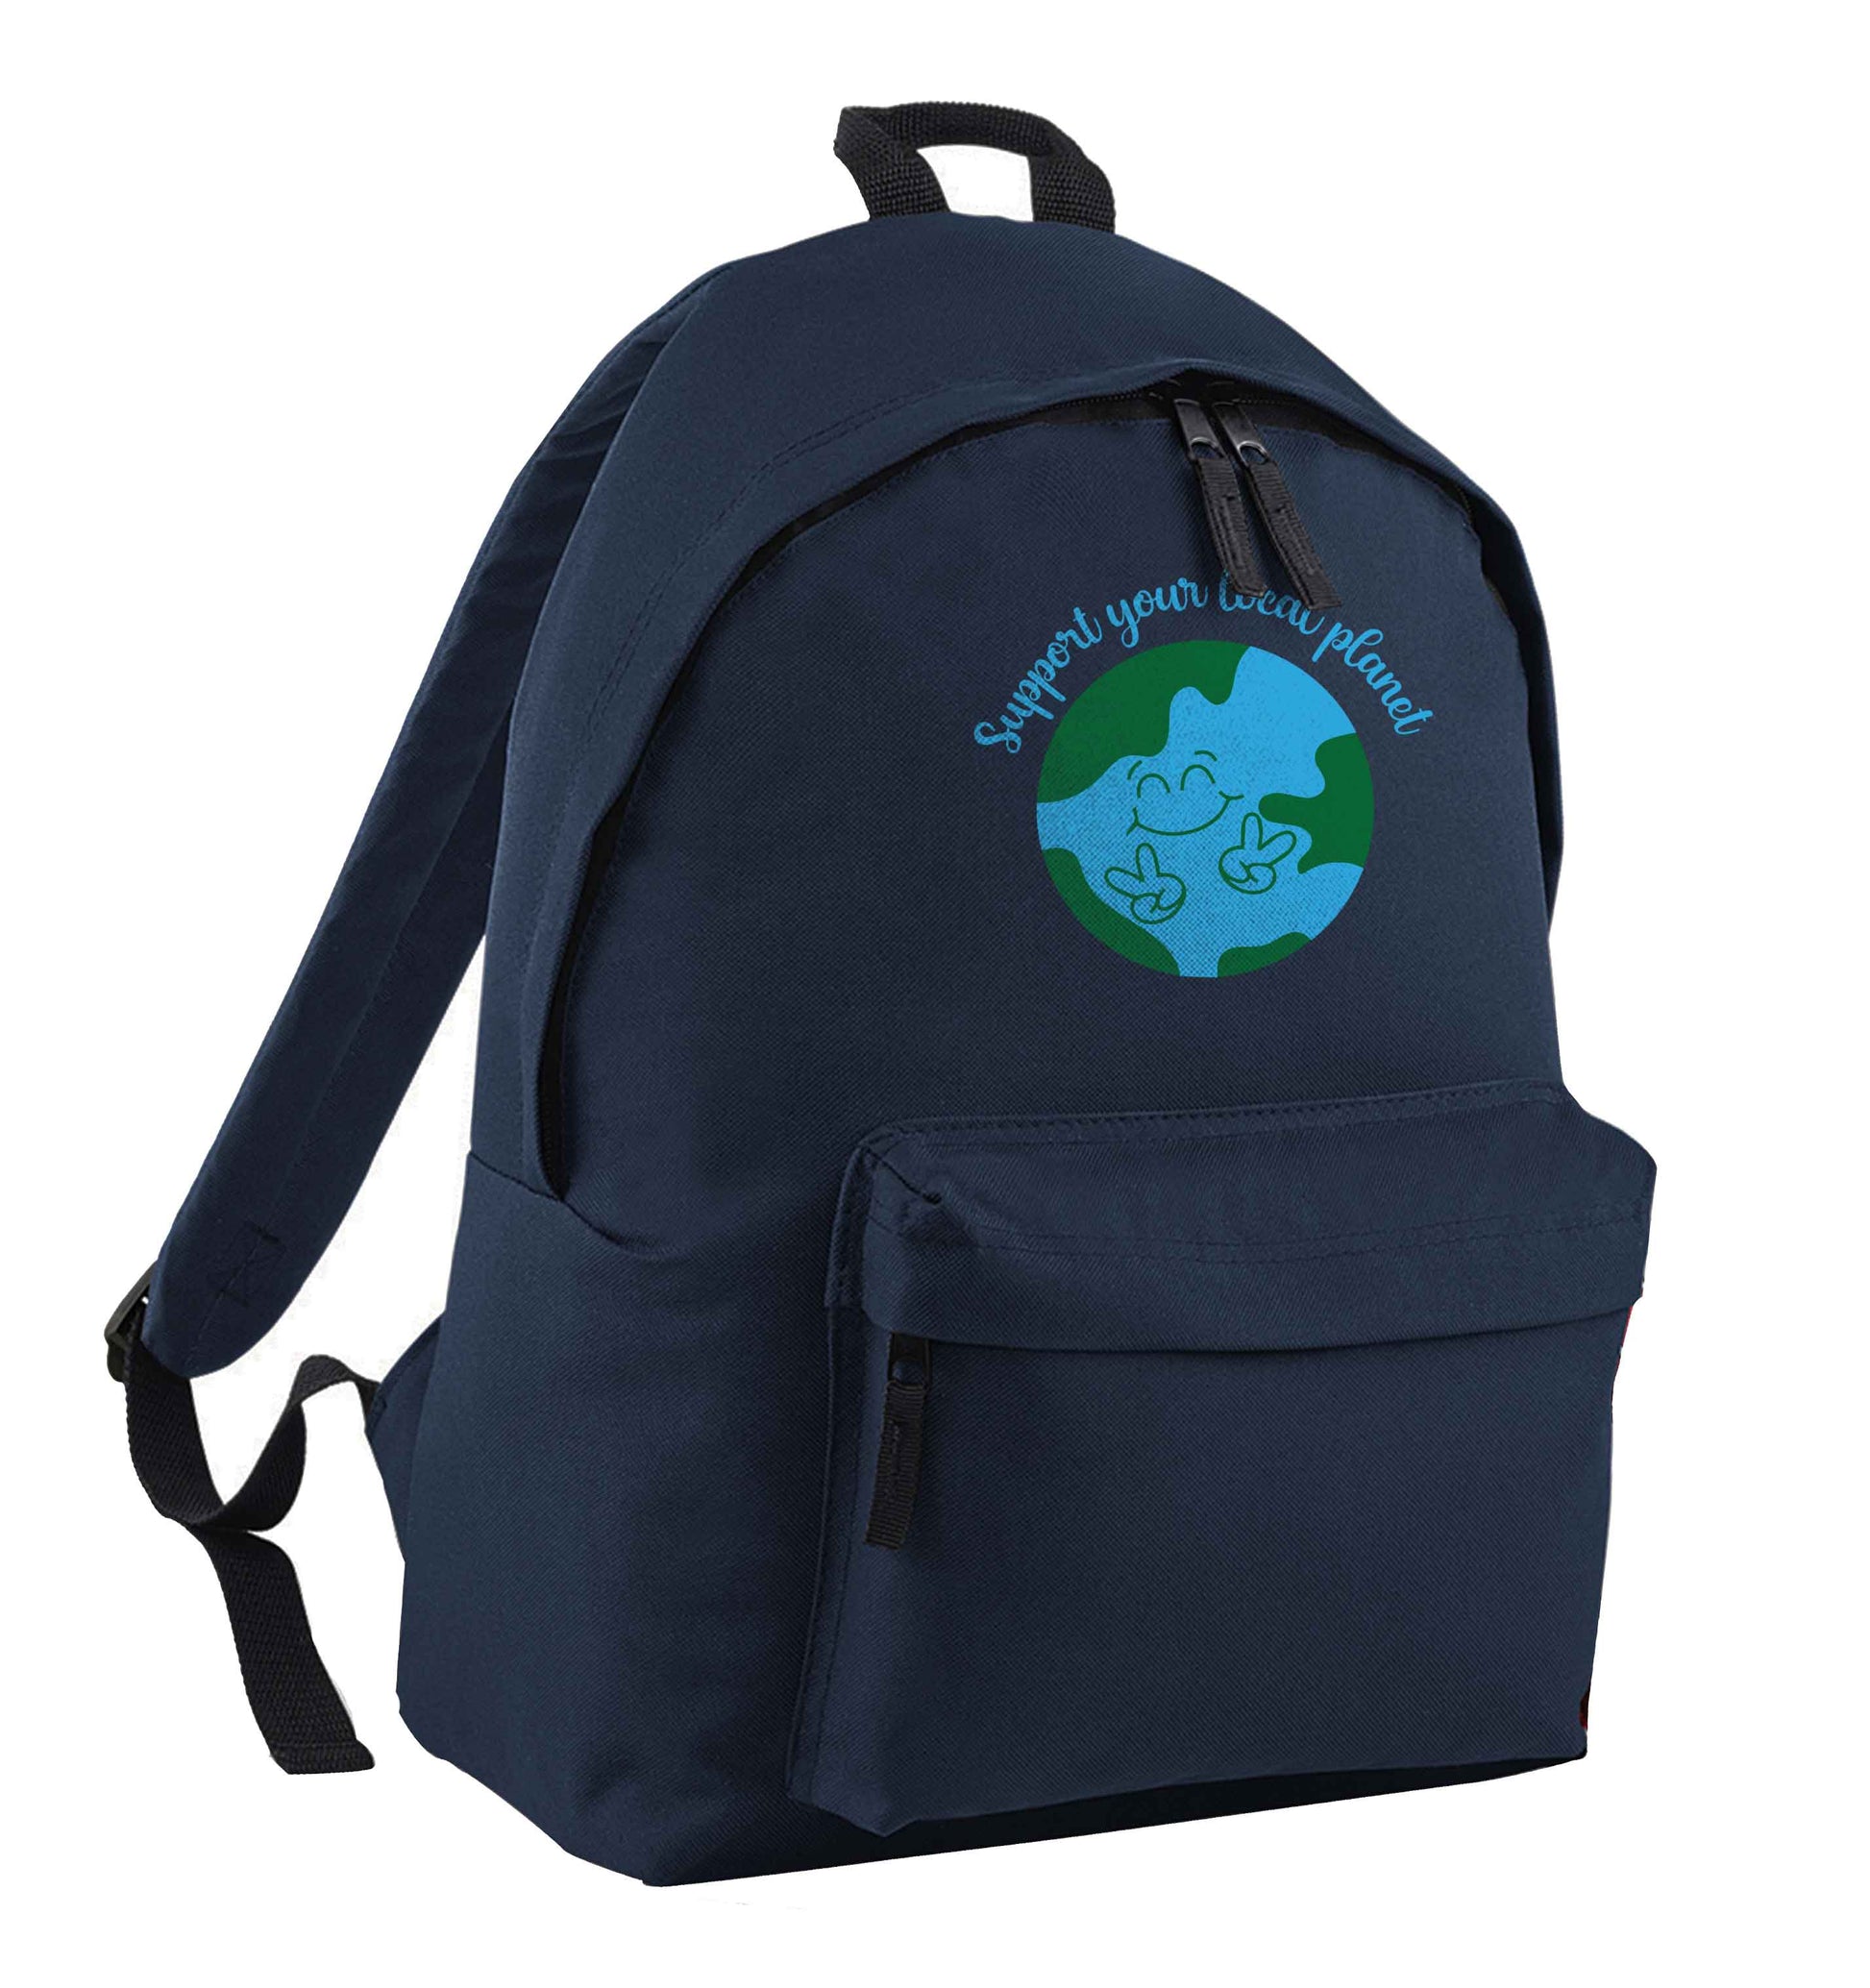 Support your local planet navy adults backpack